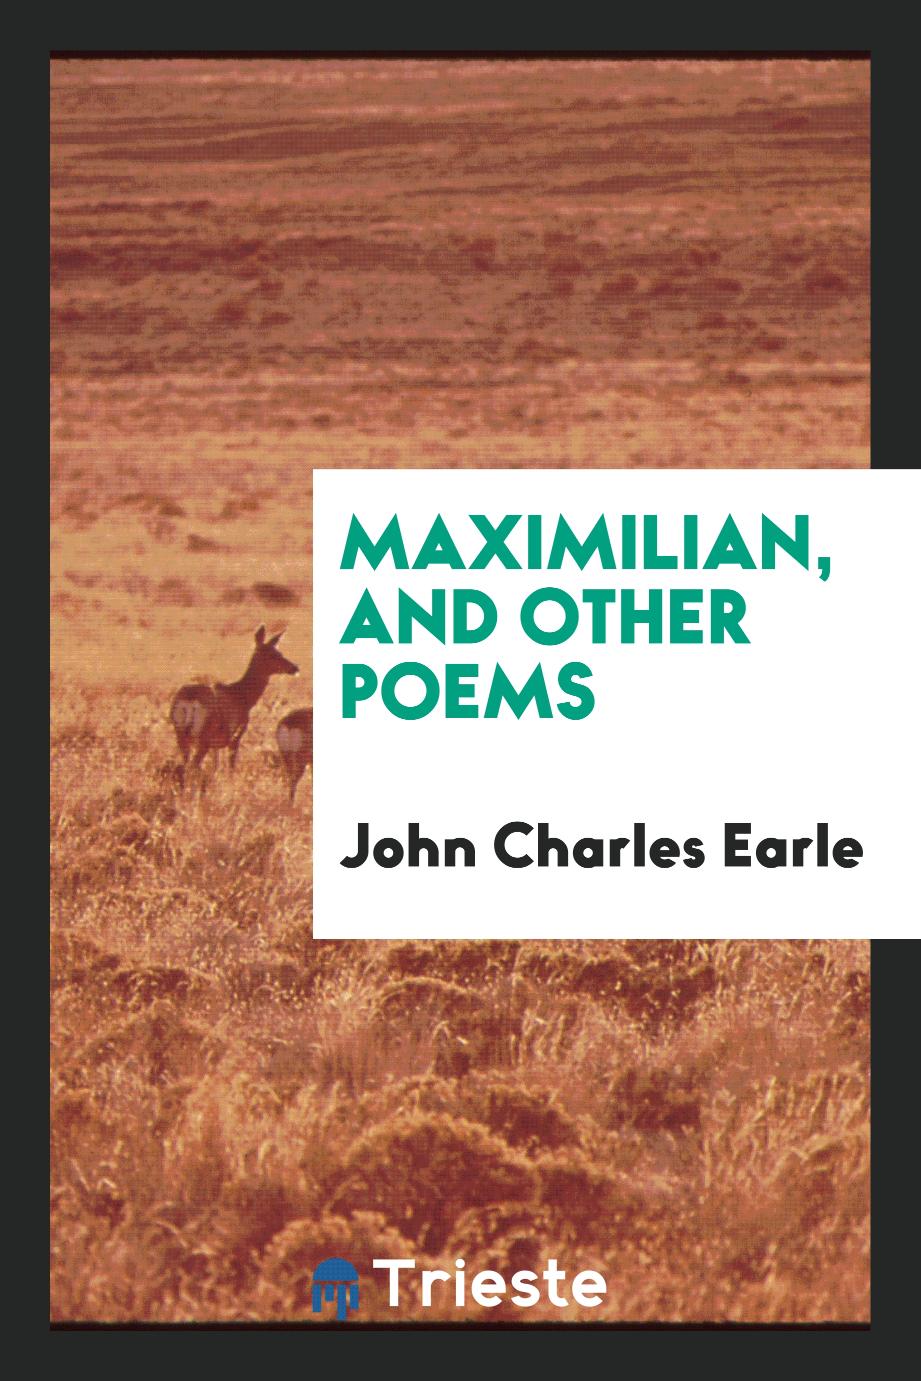 Maximilian, and other poems